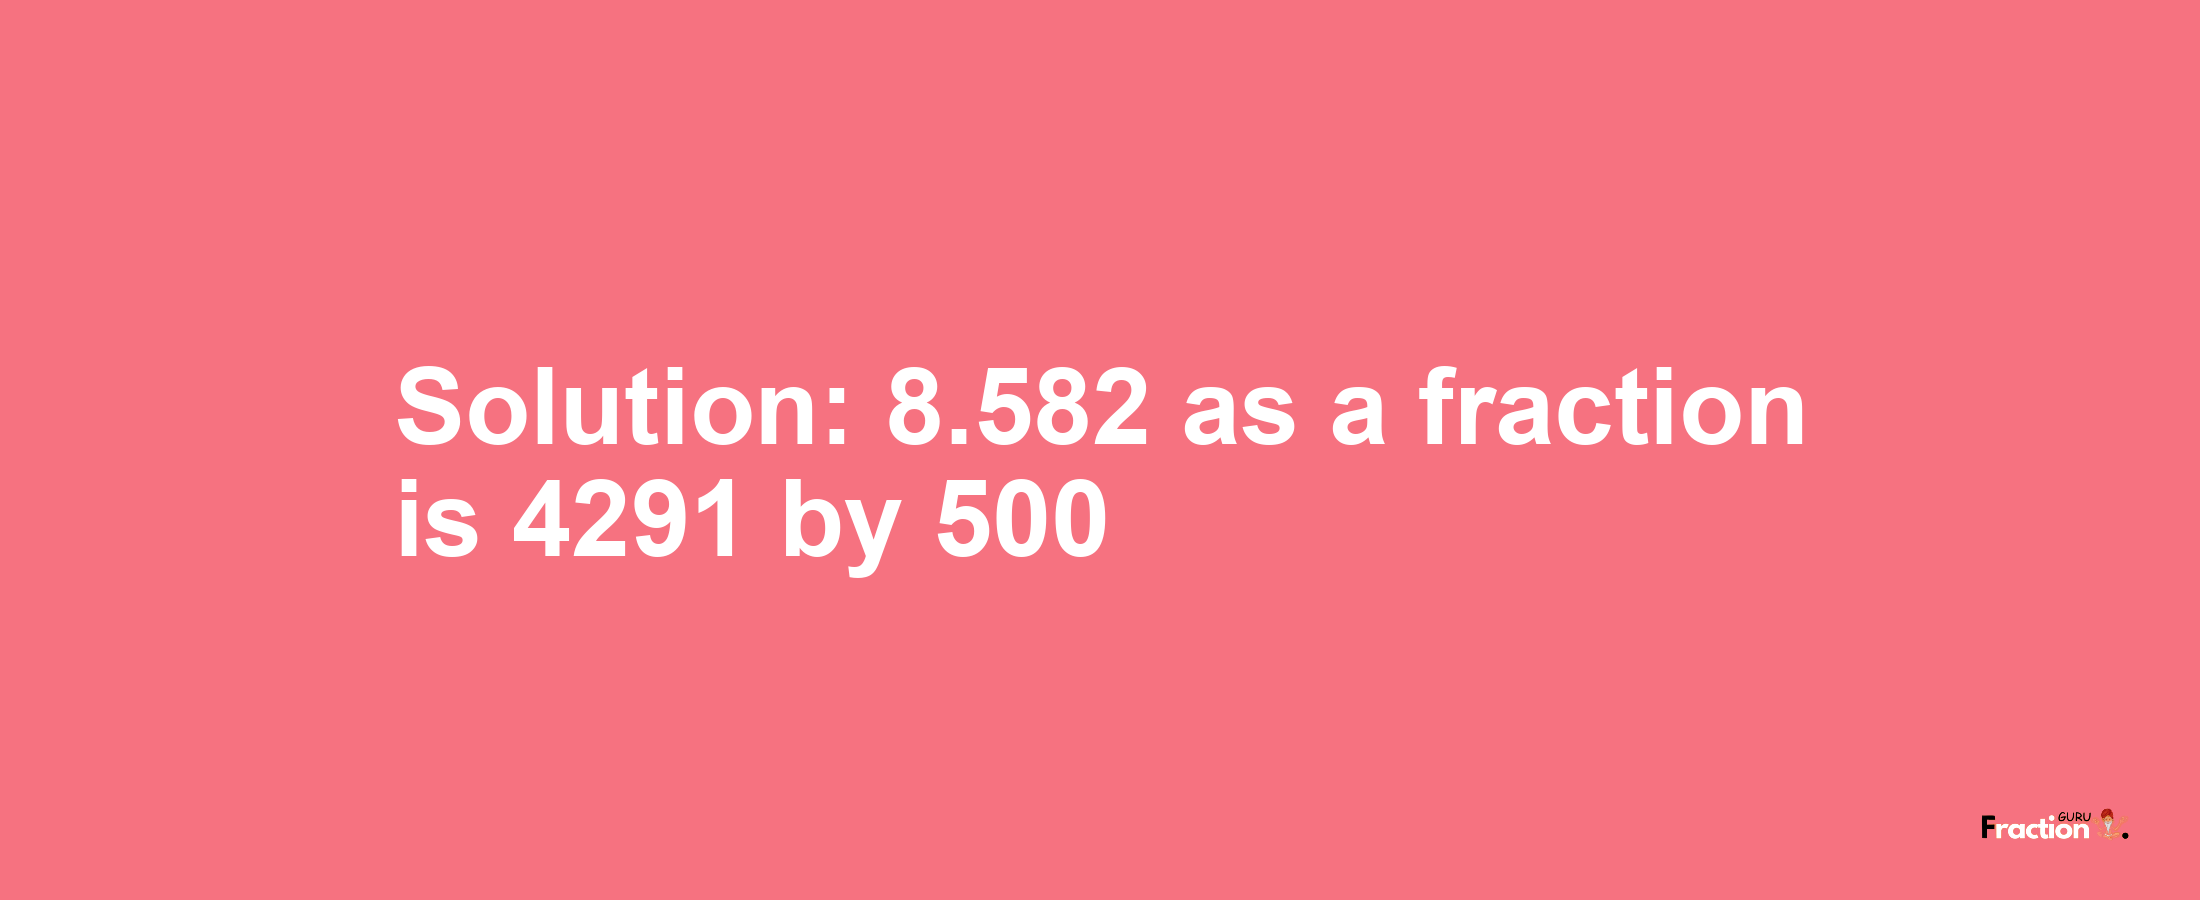 Solution:8.582 as a fraction is 4291/500